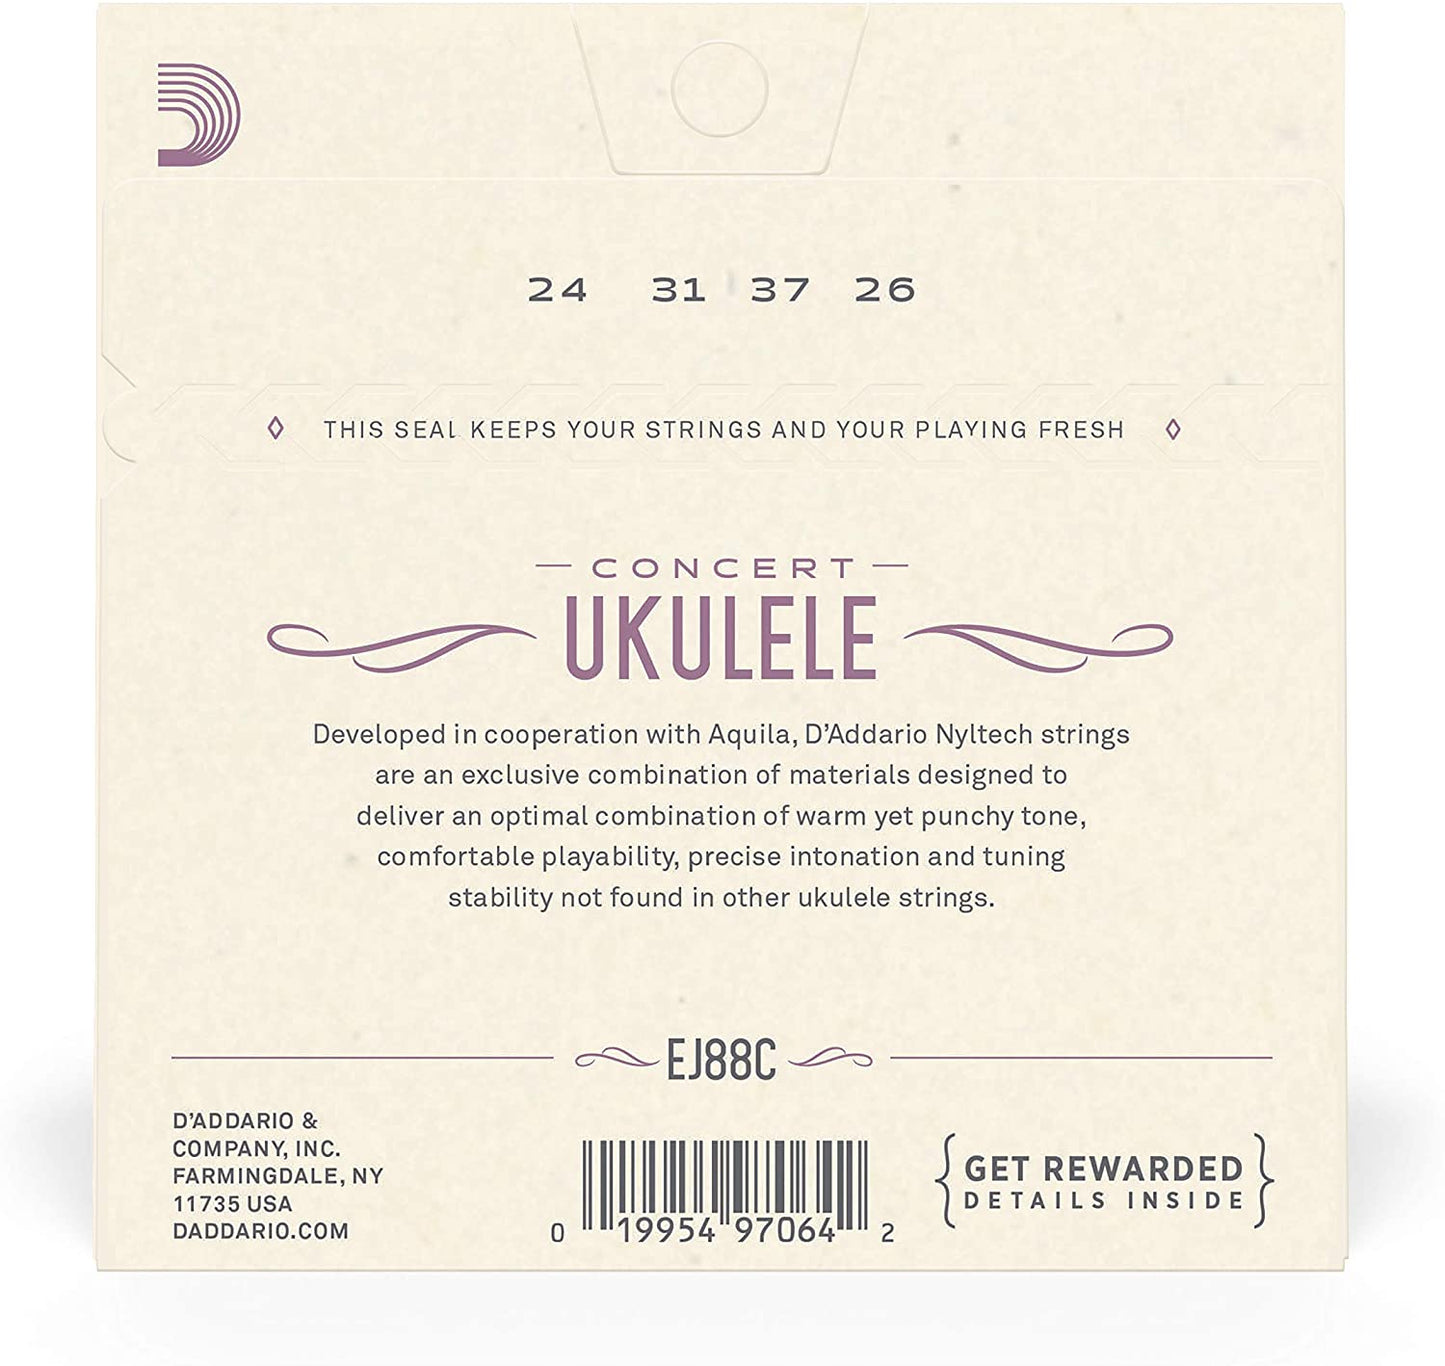 D'Addario Pro Arte Nyltech Ukulele Strings with Warm, Punchy Tones (Soprano, Concert) (EJ88C, EJ88S) for Musicians and Singers